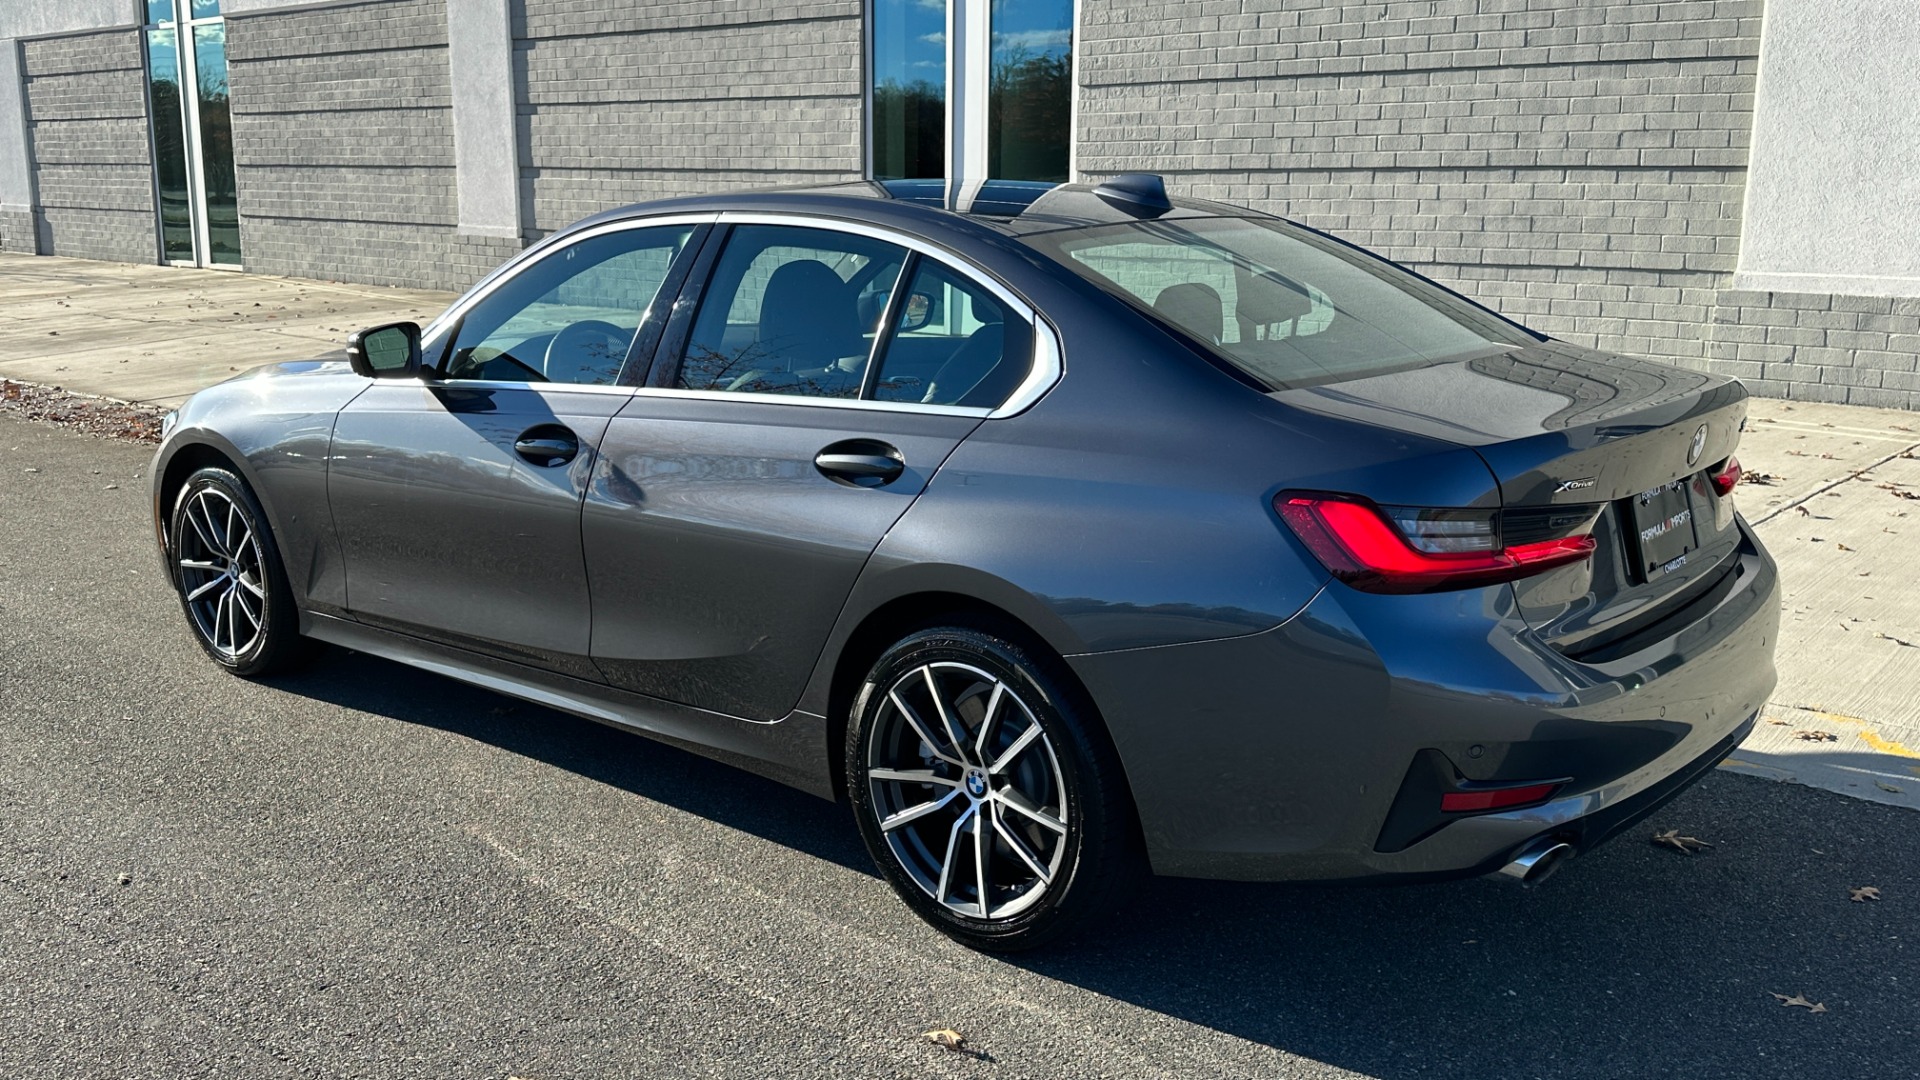 Used 2020 BMW 3 Series 330i xDRIVE / CONVENIENCE / HEATED SEATS / AMBIENT LIGHTING / REMOTE START for sale $35,995 at Formula Imports in Charlotte NC 28227 7